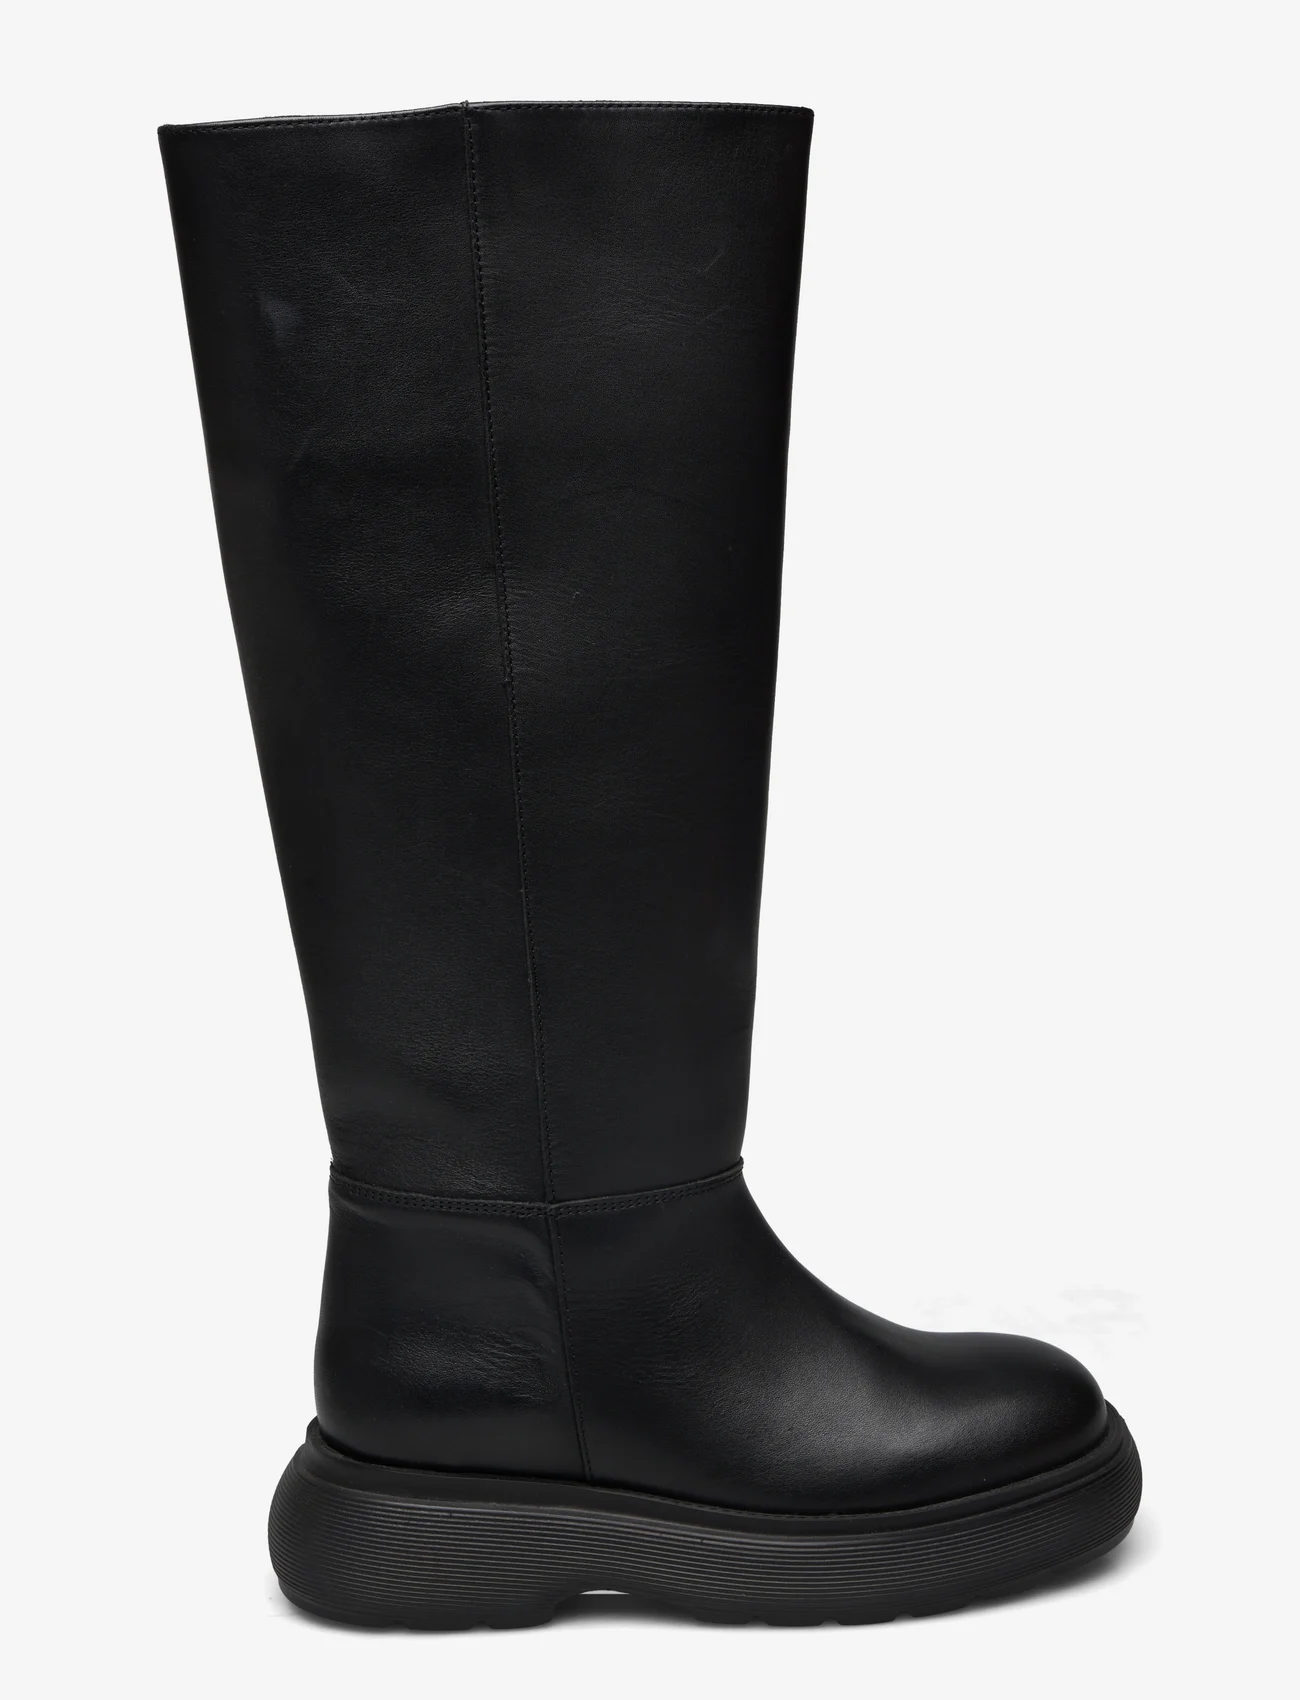 Garment Project - Cloud High Boot - Black Leather - knee high boots - black - 1